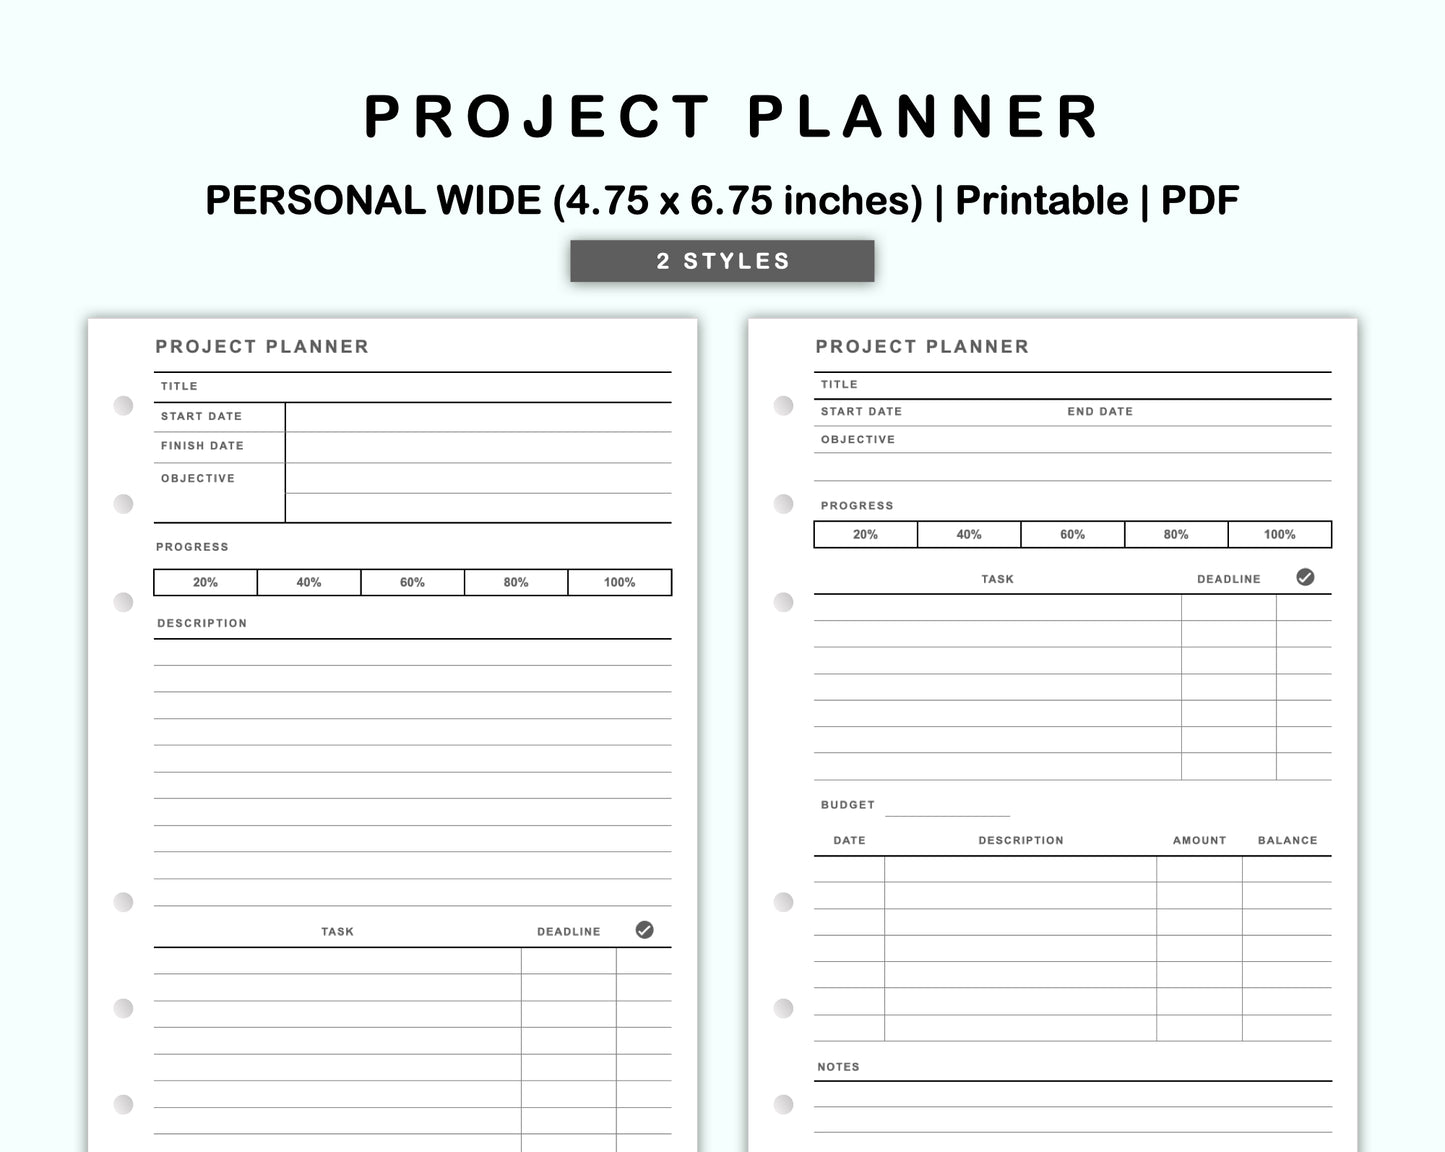 Personal Wide Inserts - Project Planner